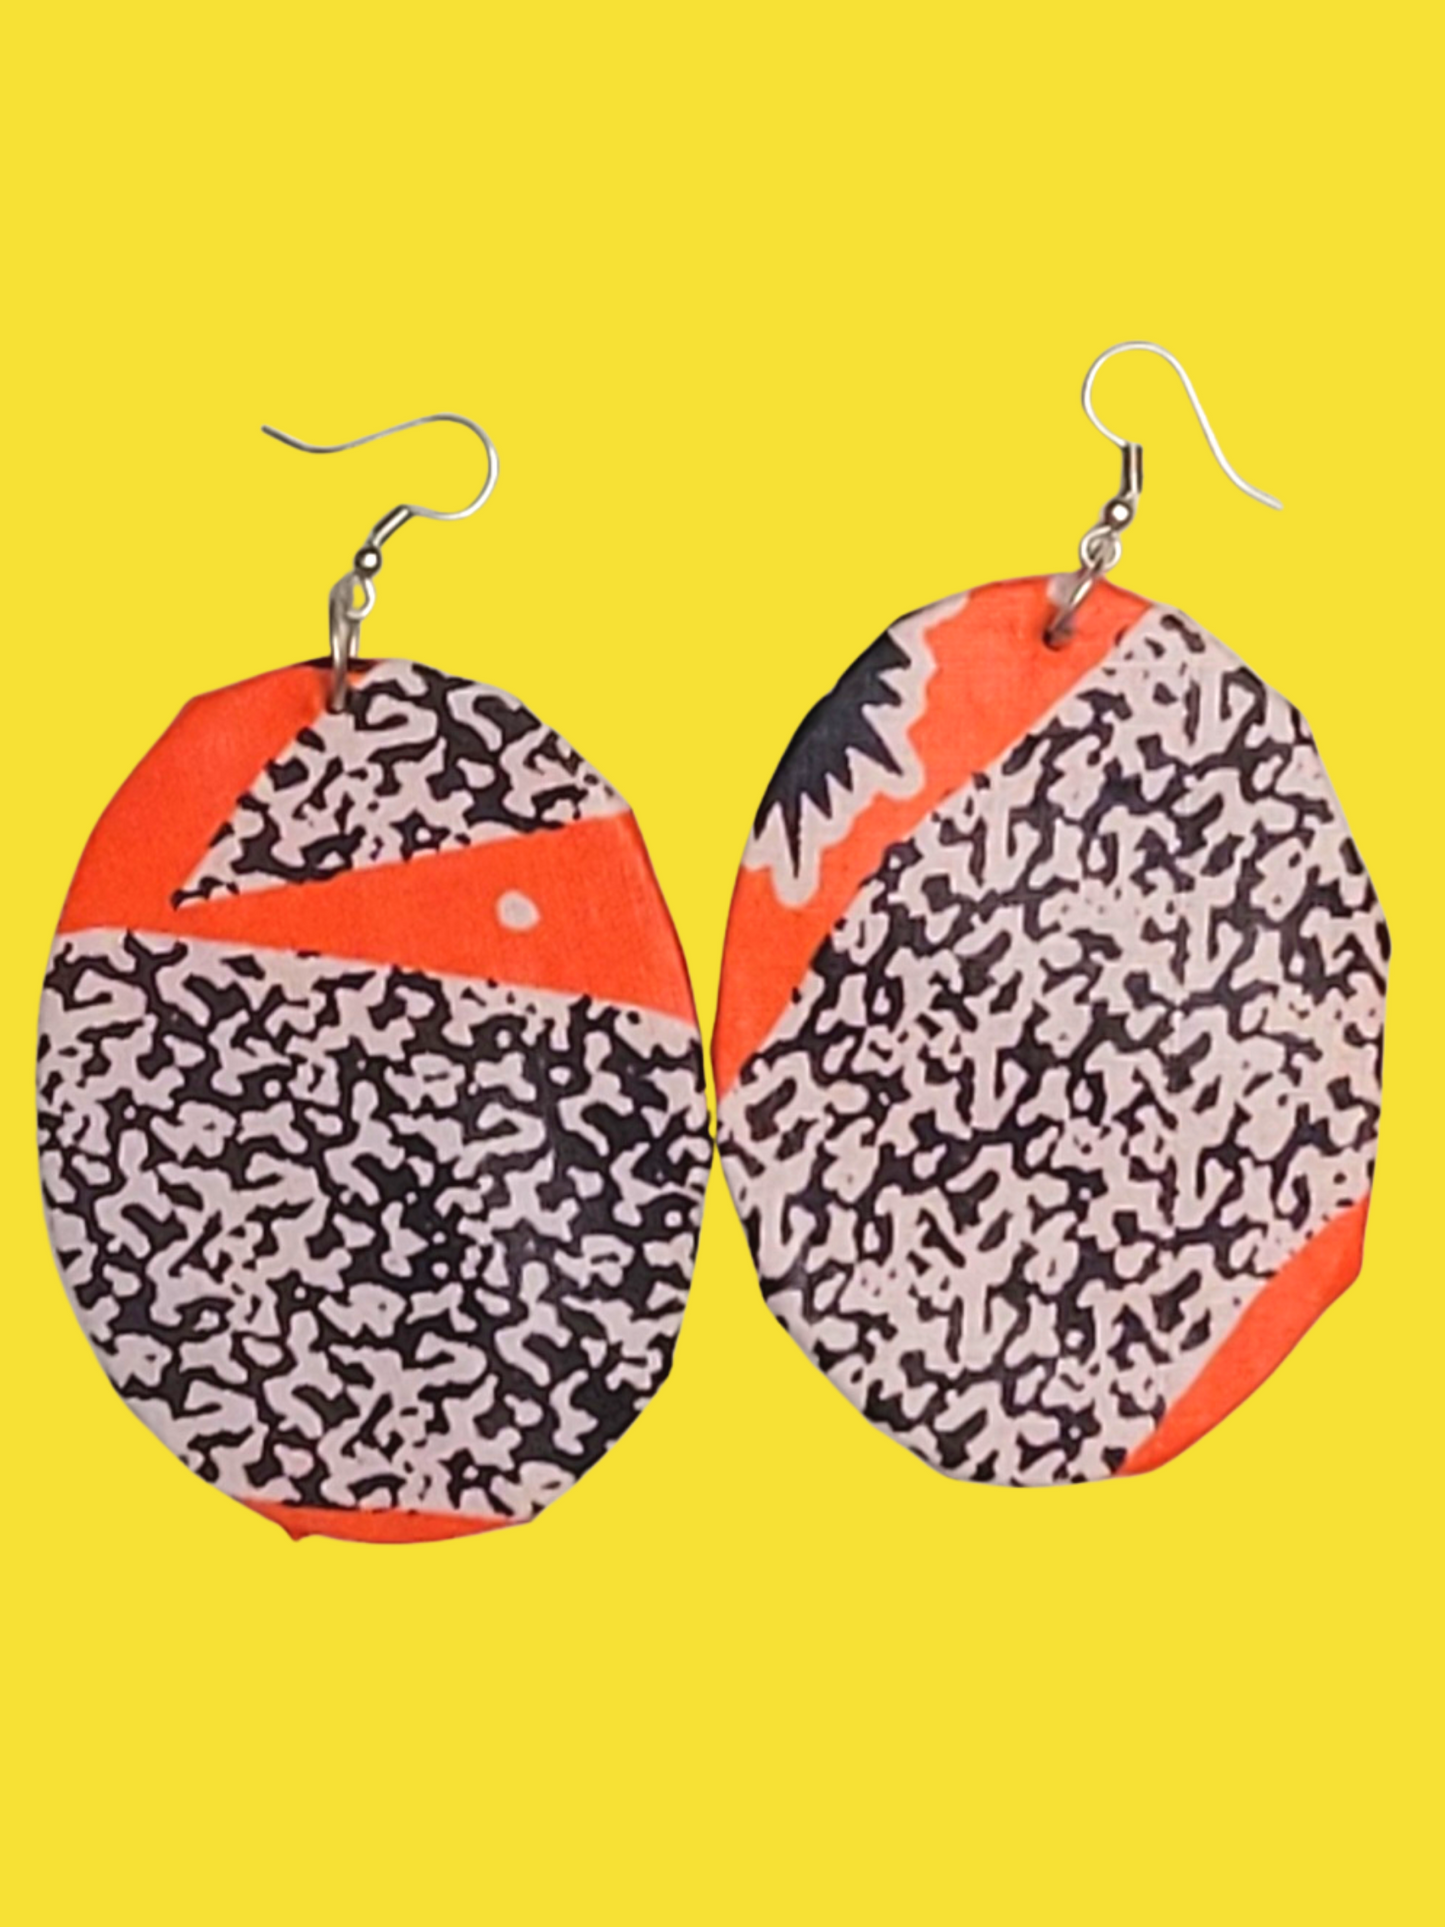 Geometric Afrocentric Earrings - Semi Circles, Rectangles, and Oval Shapes